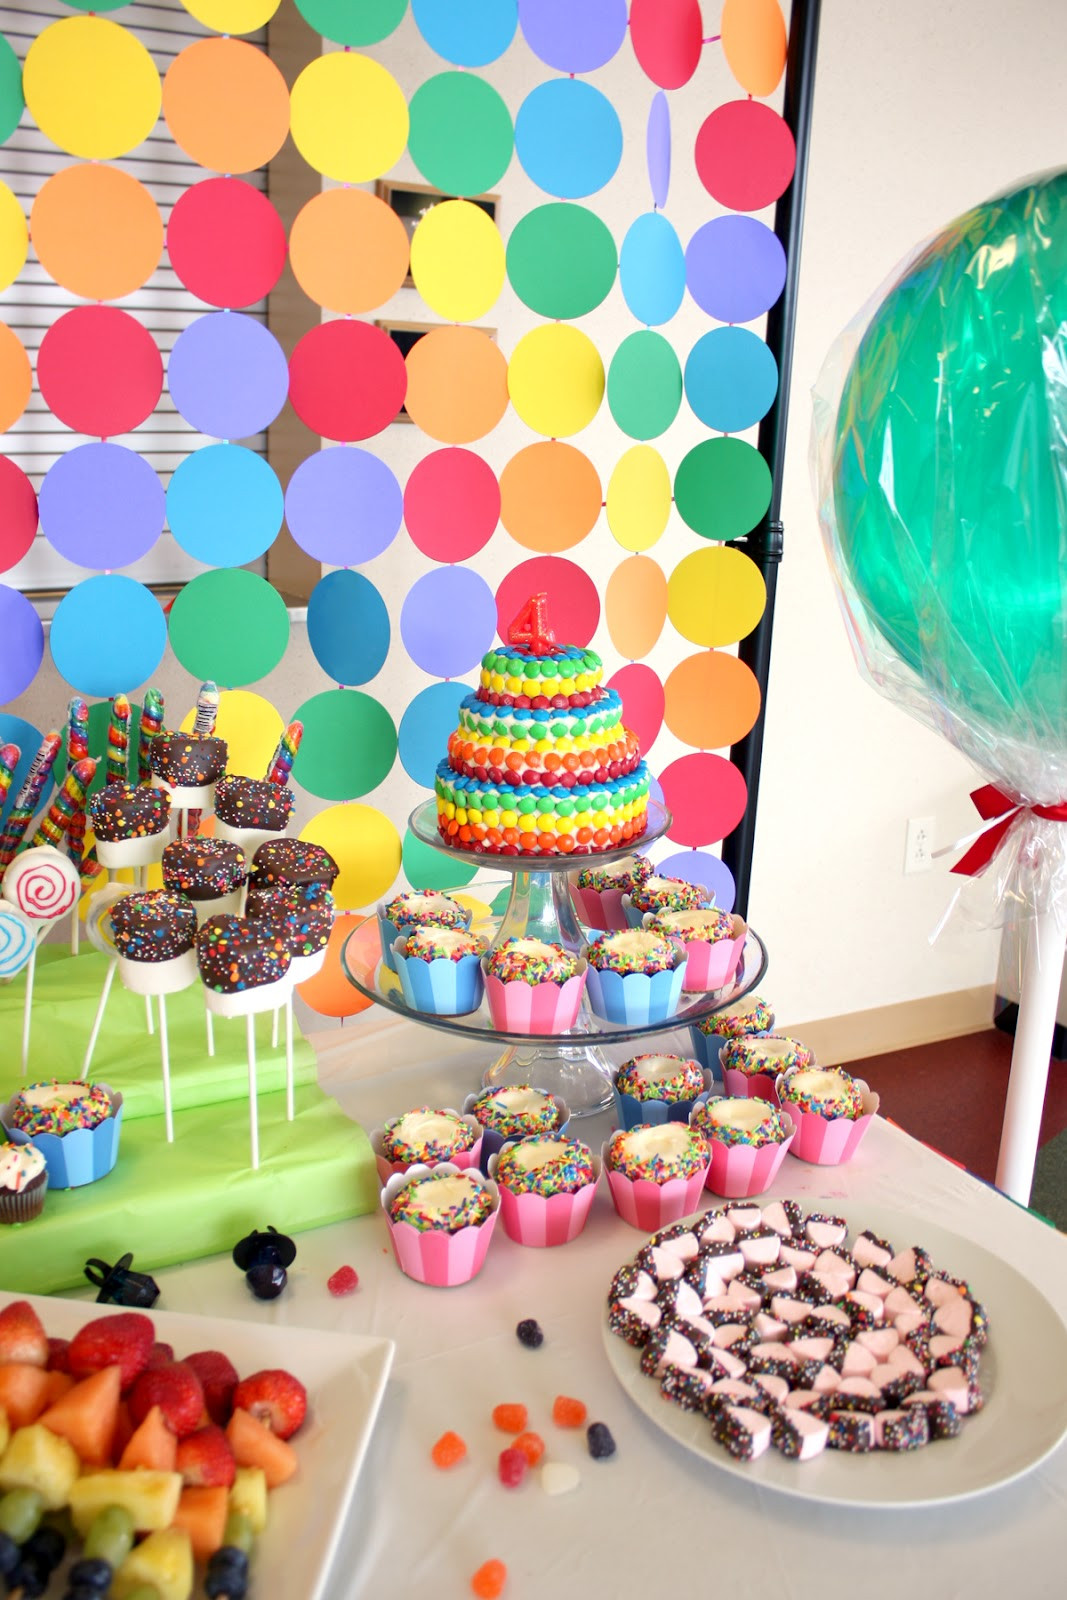 Candyland Birthday Party Ideas
 The Everyday Posh Candy Land Birthday Party